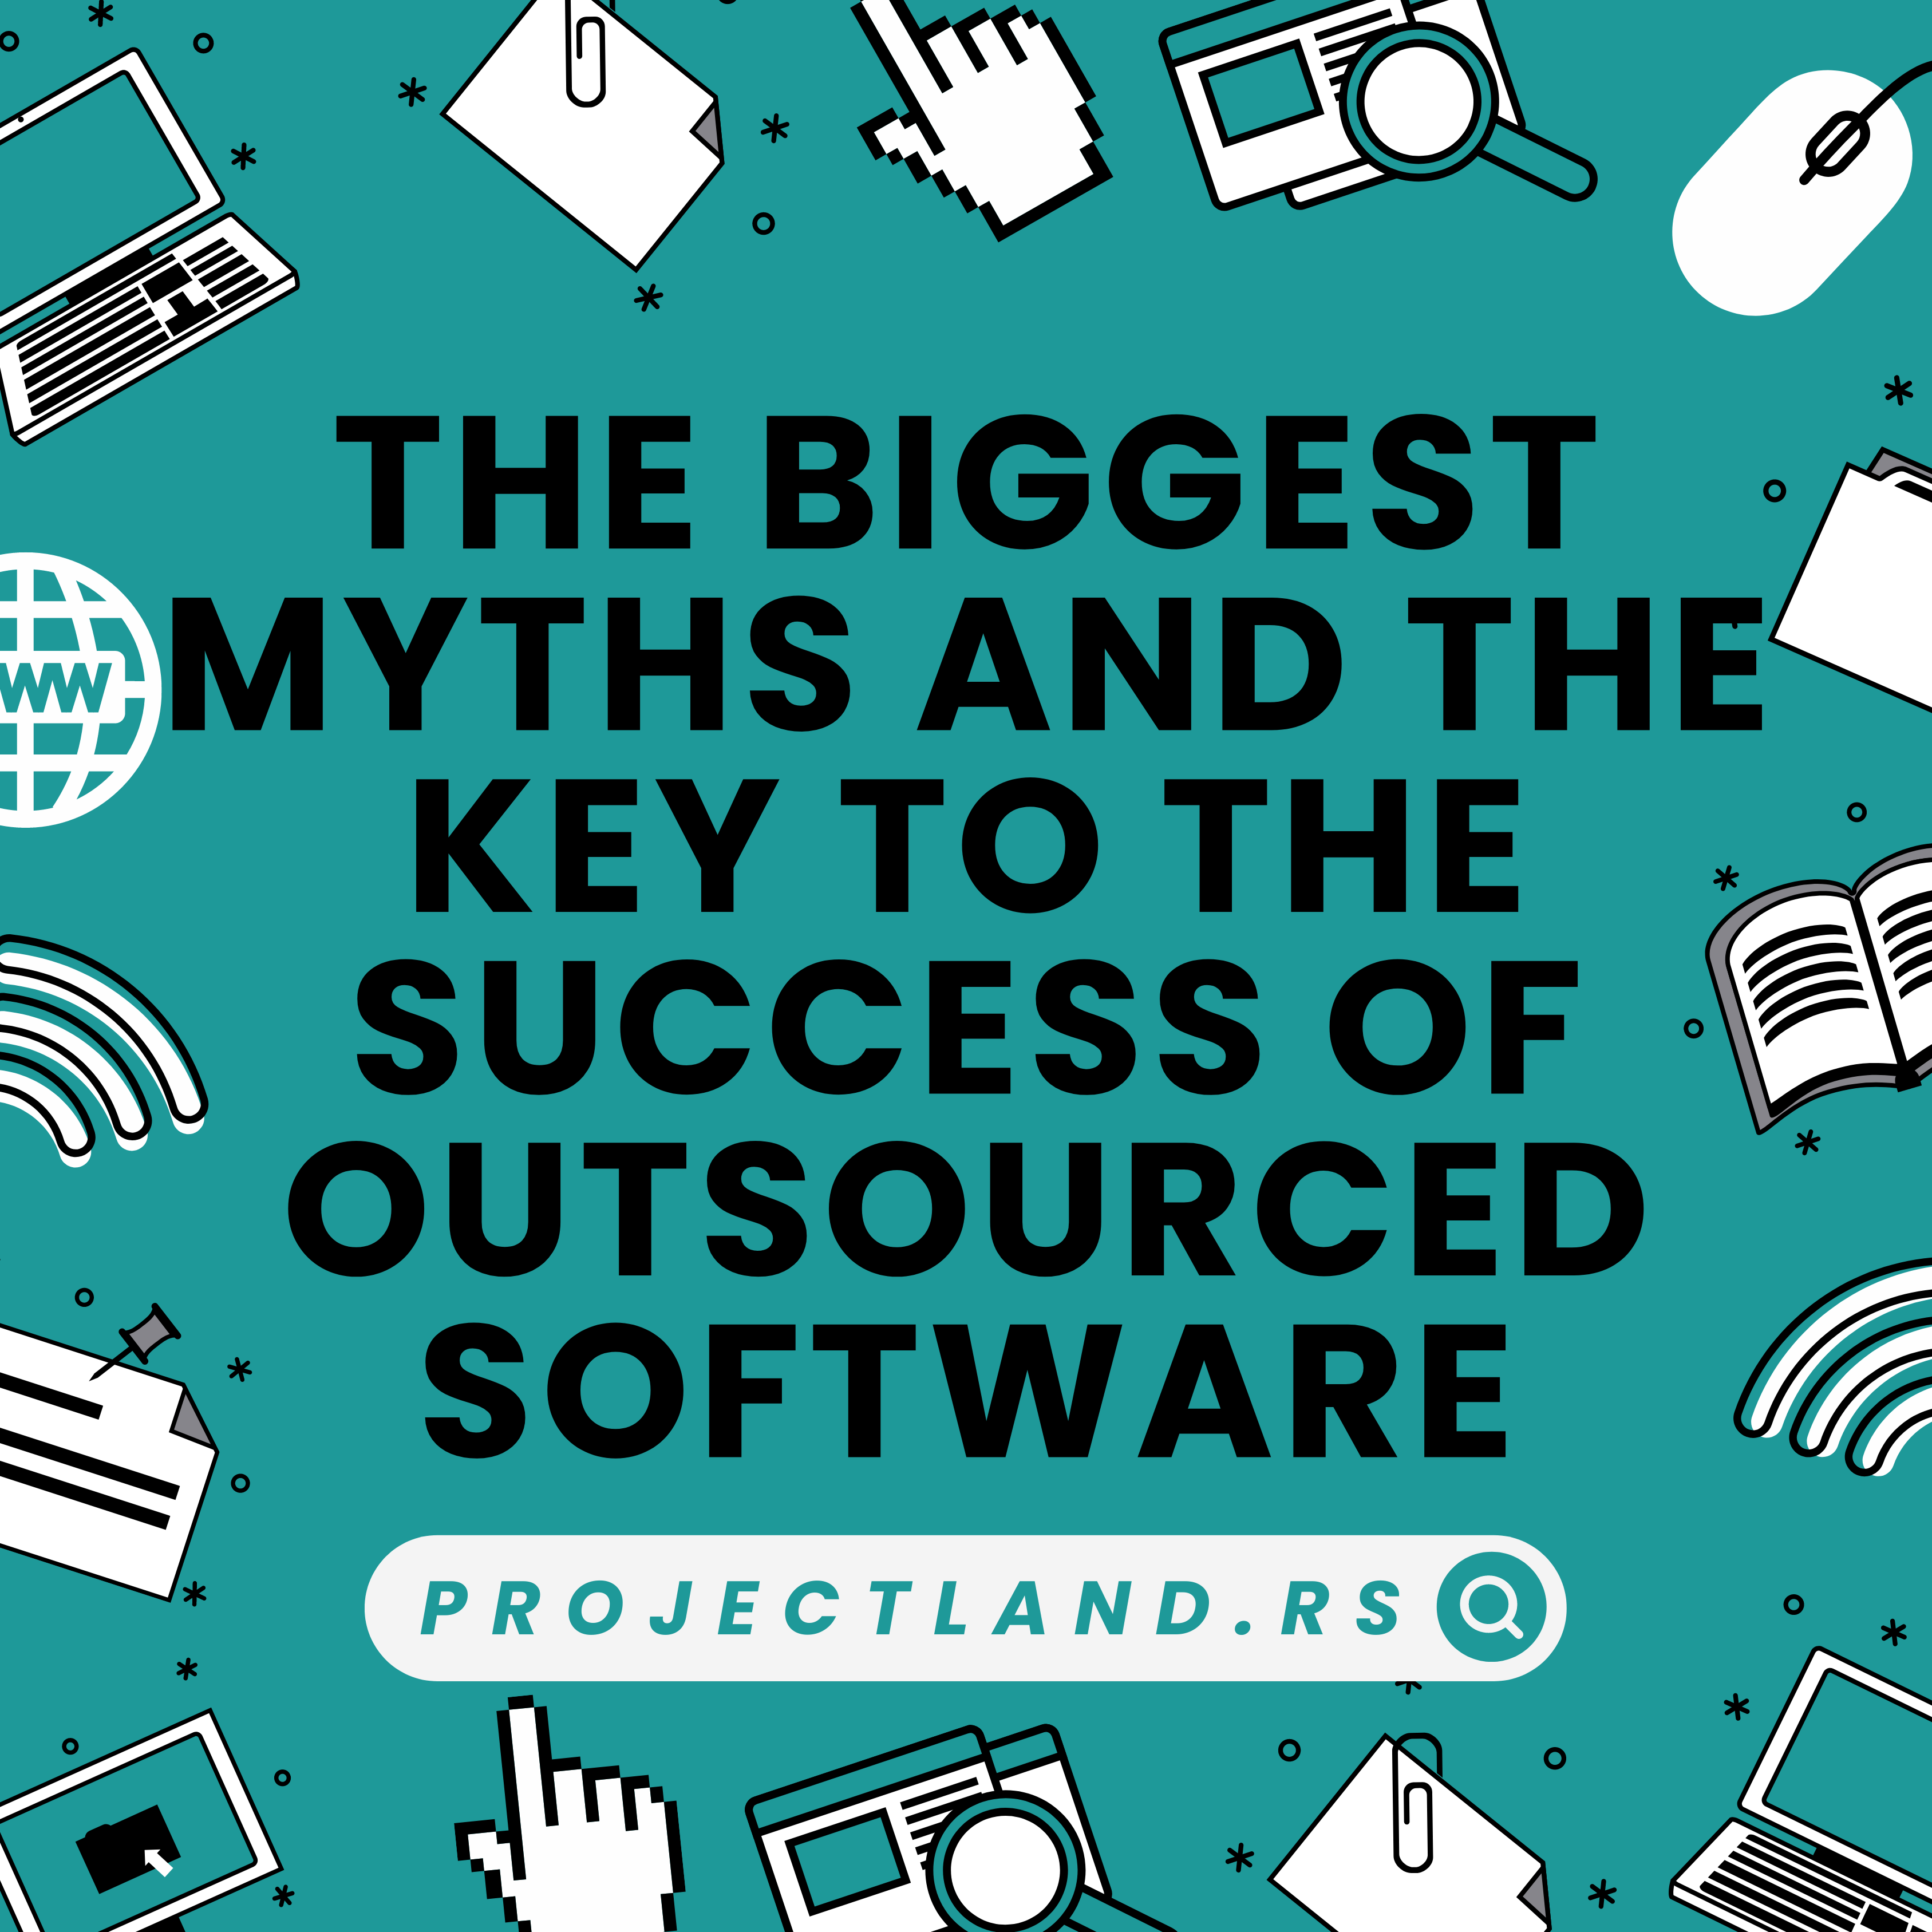 THE BIGGEST MYTHS AND THE KEY TO THE SUCCESS OF OUTSOURCED SOFTWARE